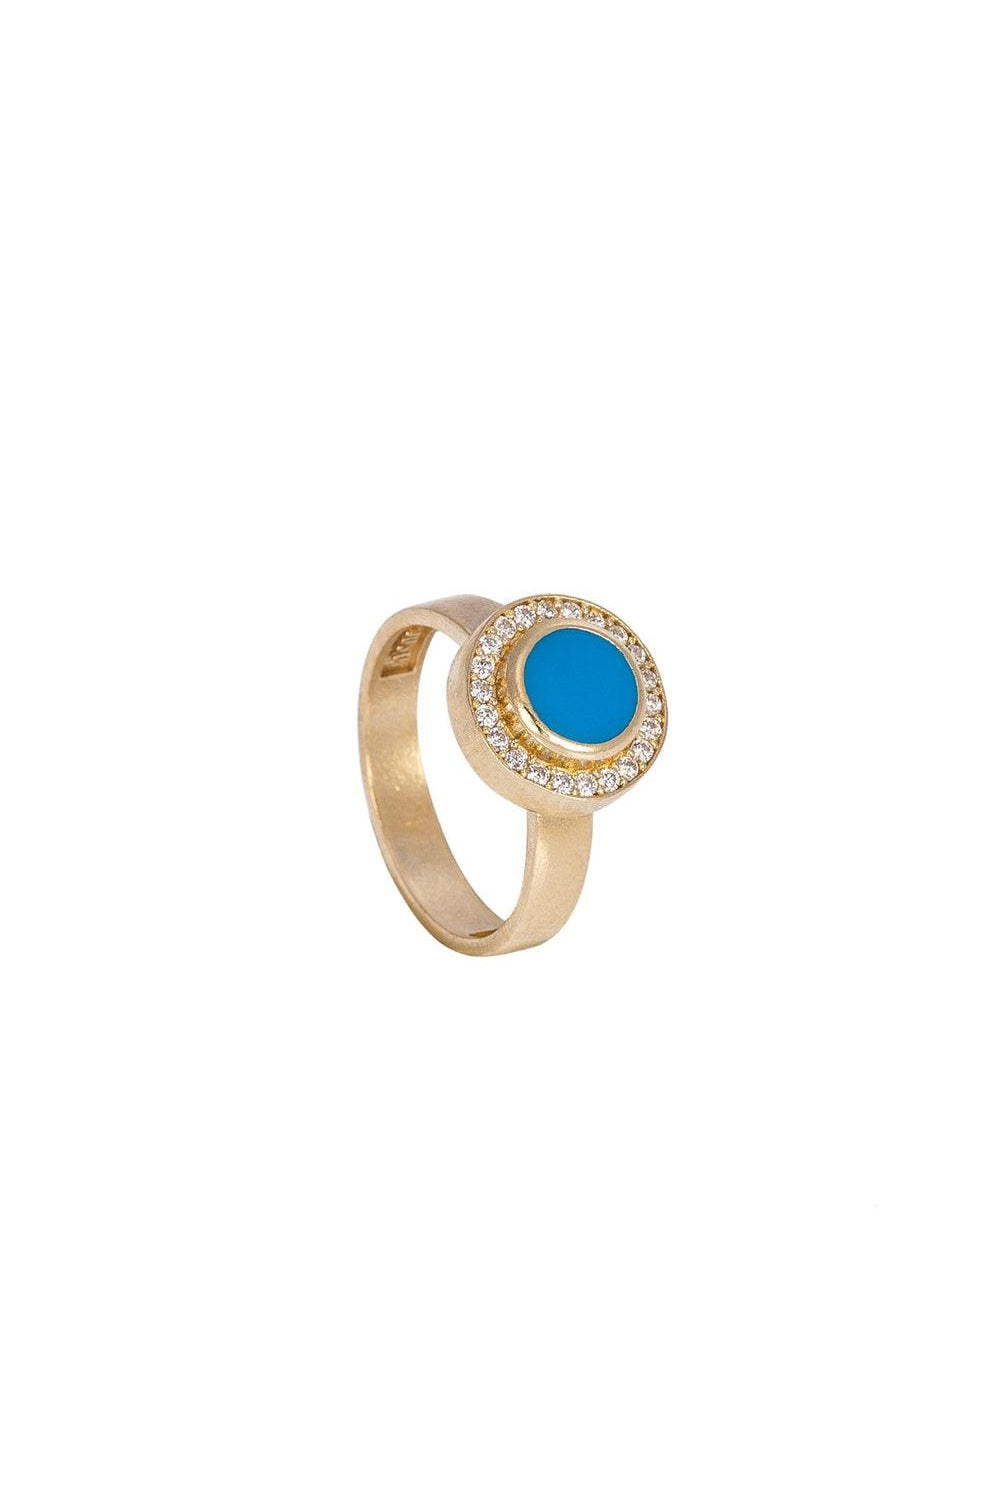 JUJU | Round Ring with Enamel and Stones CRM-953 1 | Milagron